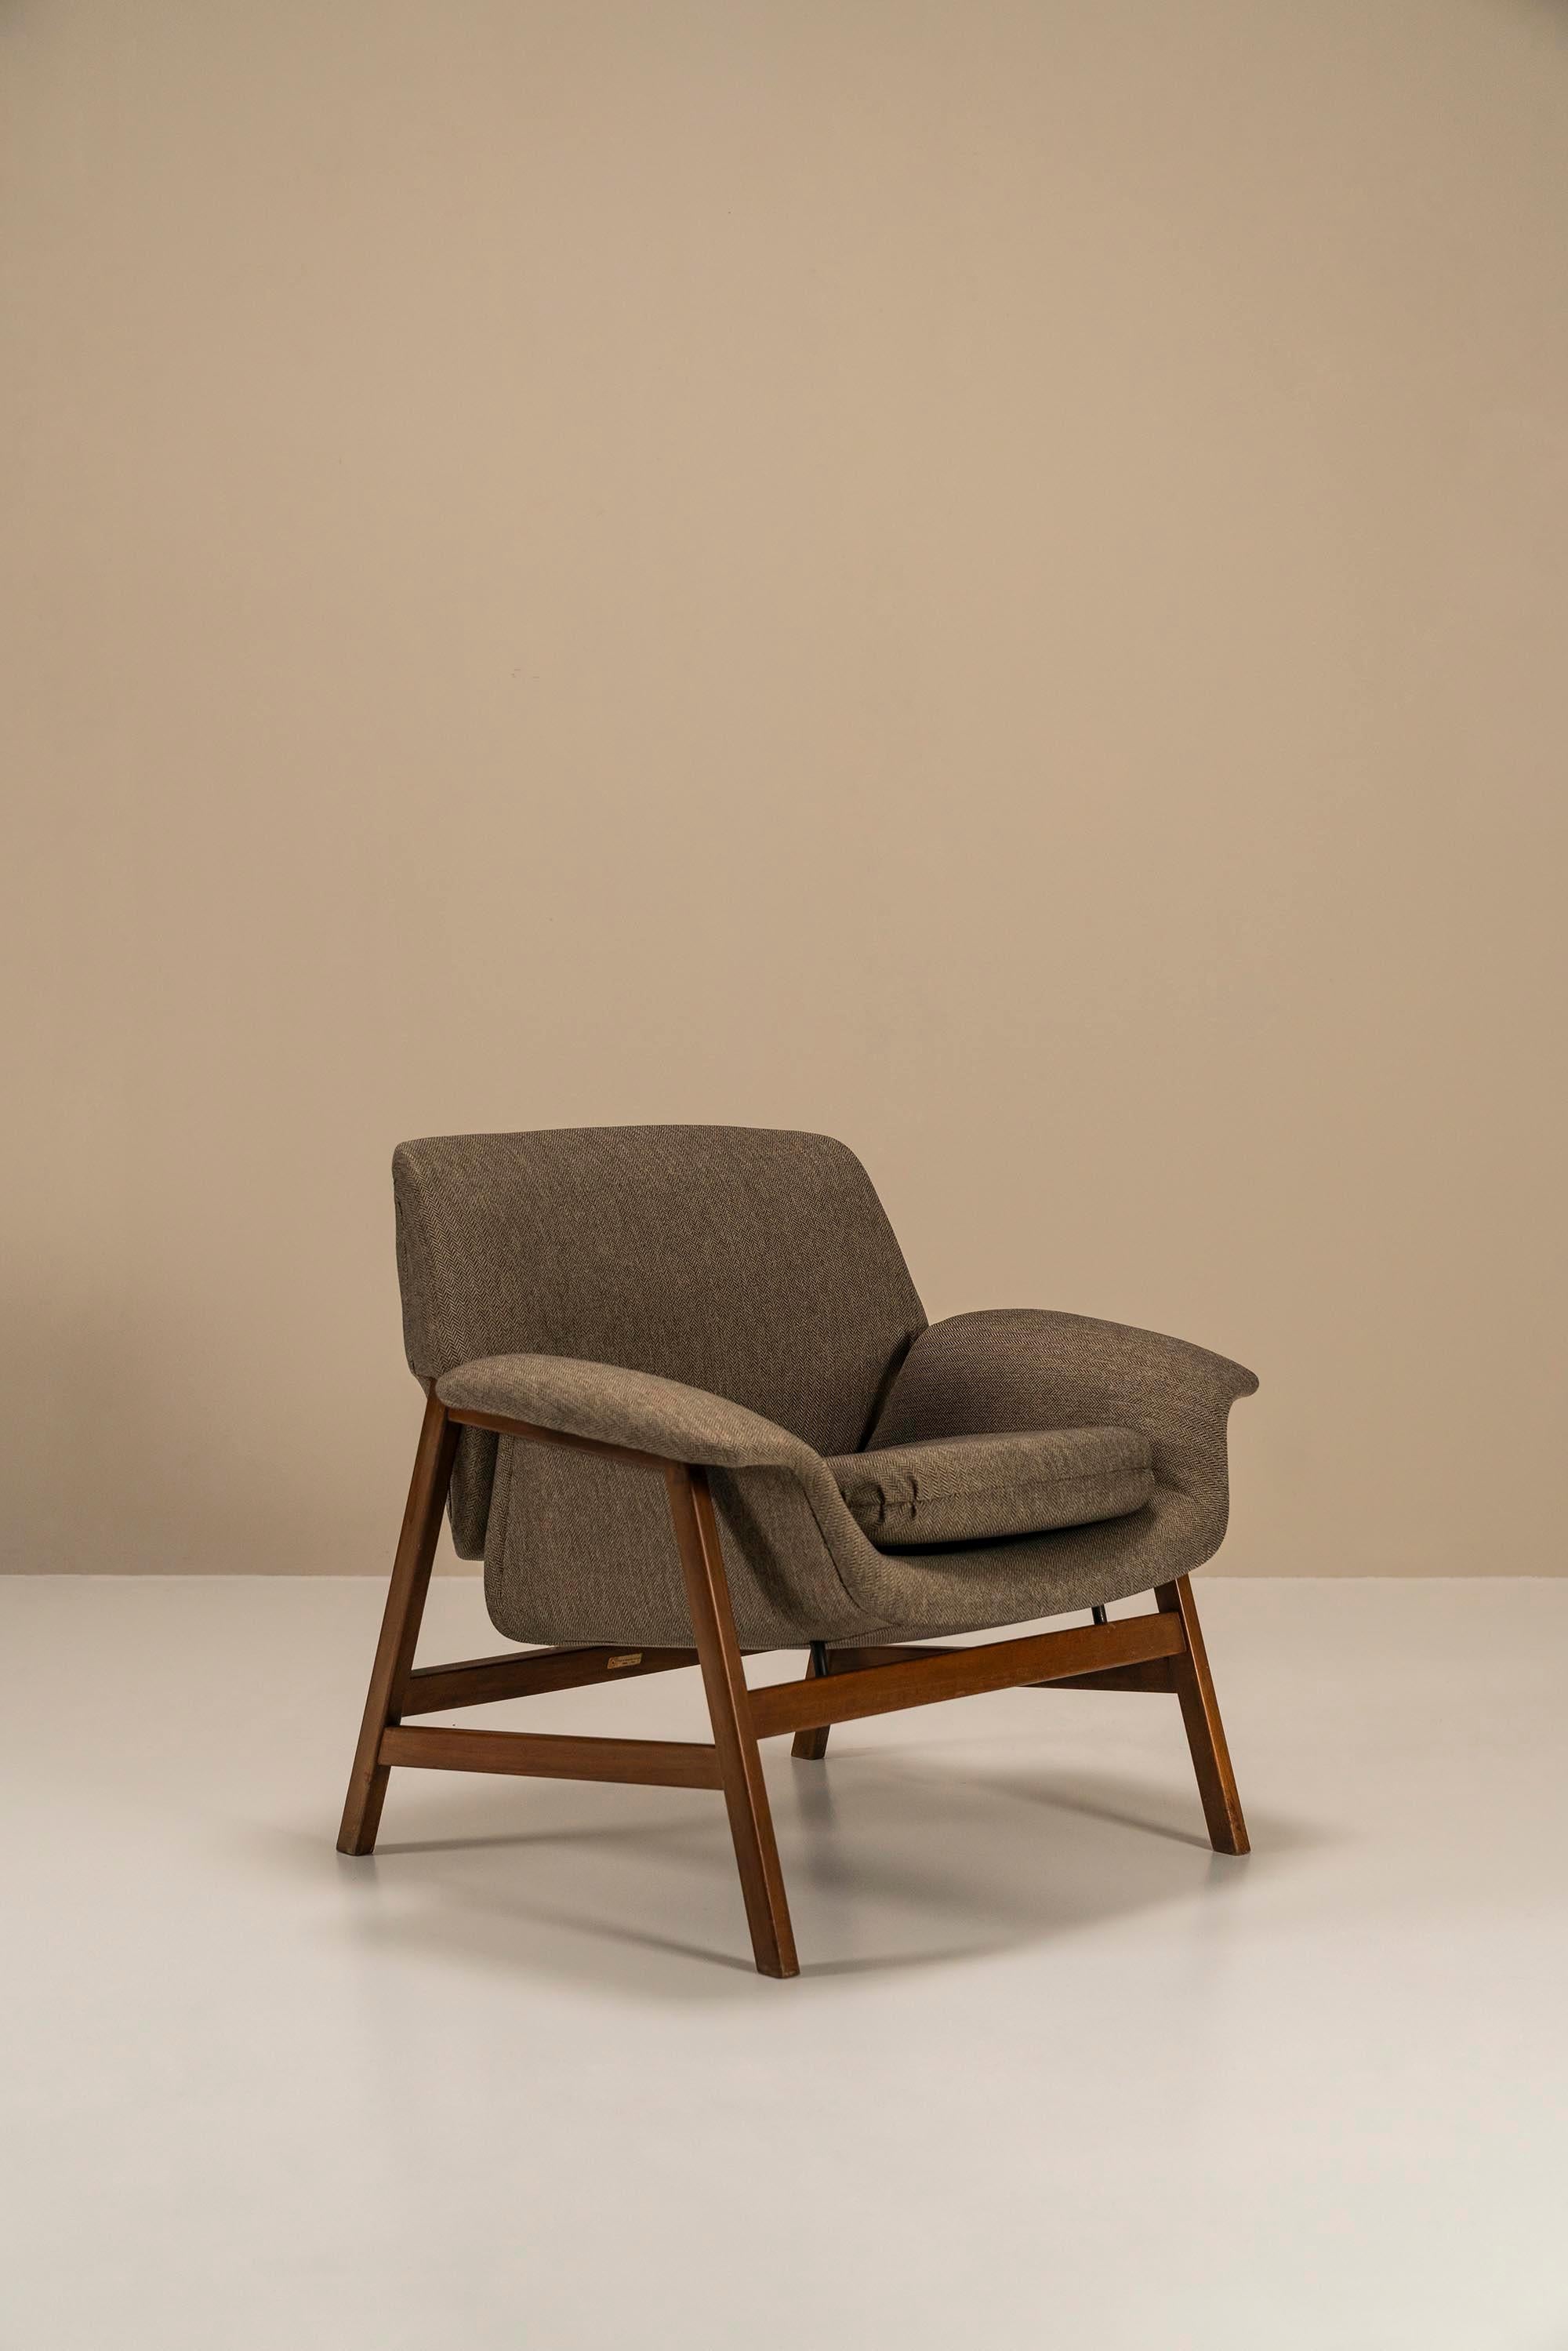 Lounge Chair Model 849 By Gianfranco Frattini For Cassina, Italy 1950s For Sale 2